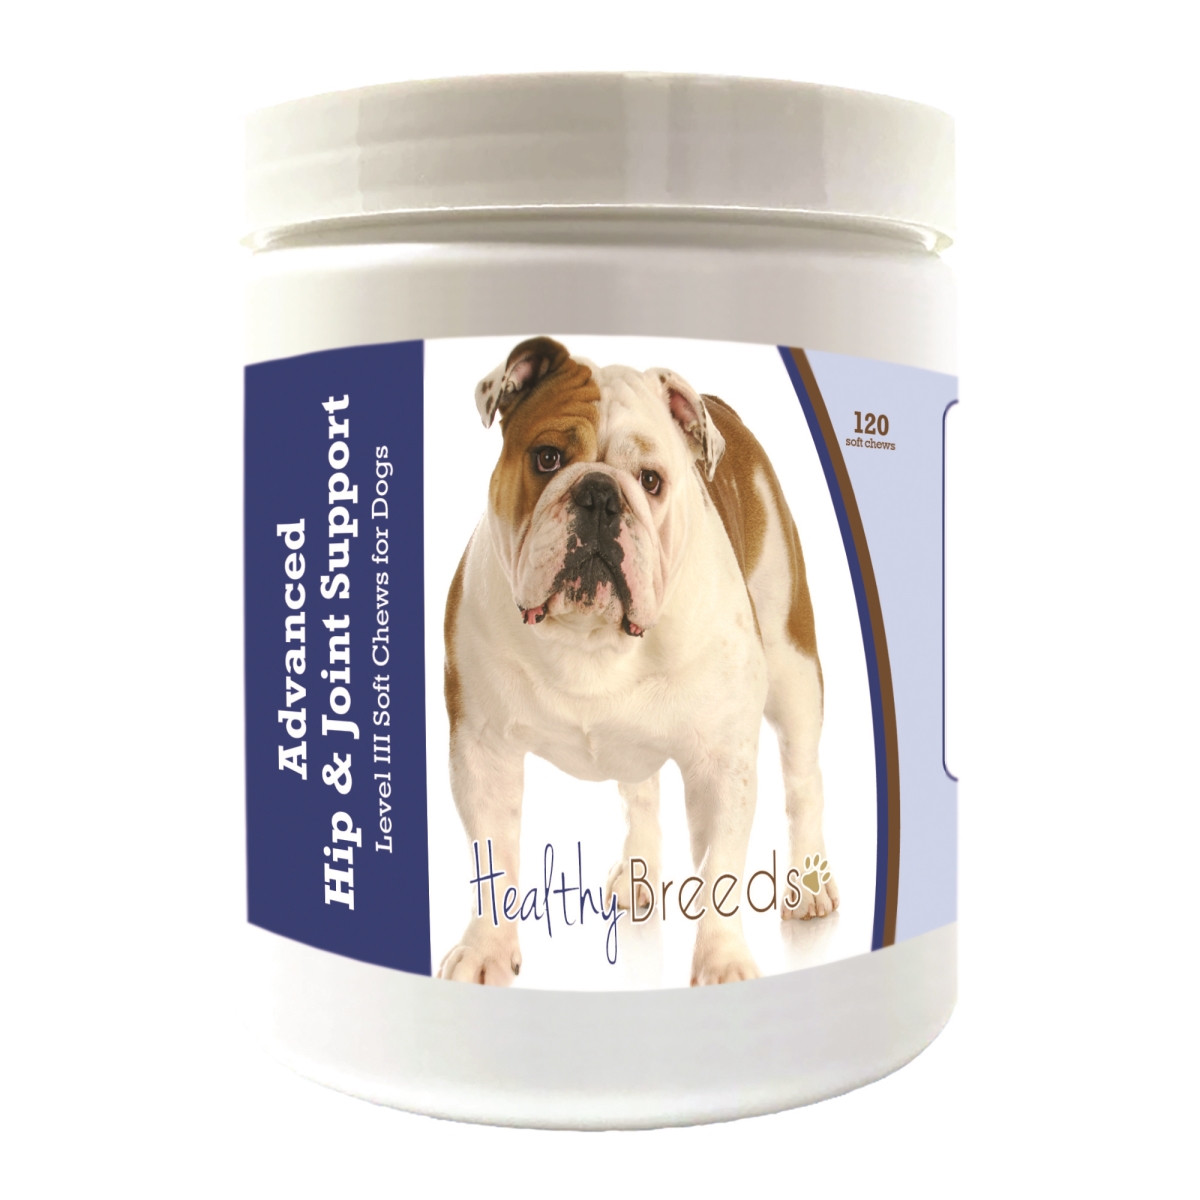 Picture of Healthy Breeds 192959897821 Bulldog Advanced Hip & Joint Support Level III Soft Chews for Dogs